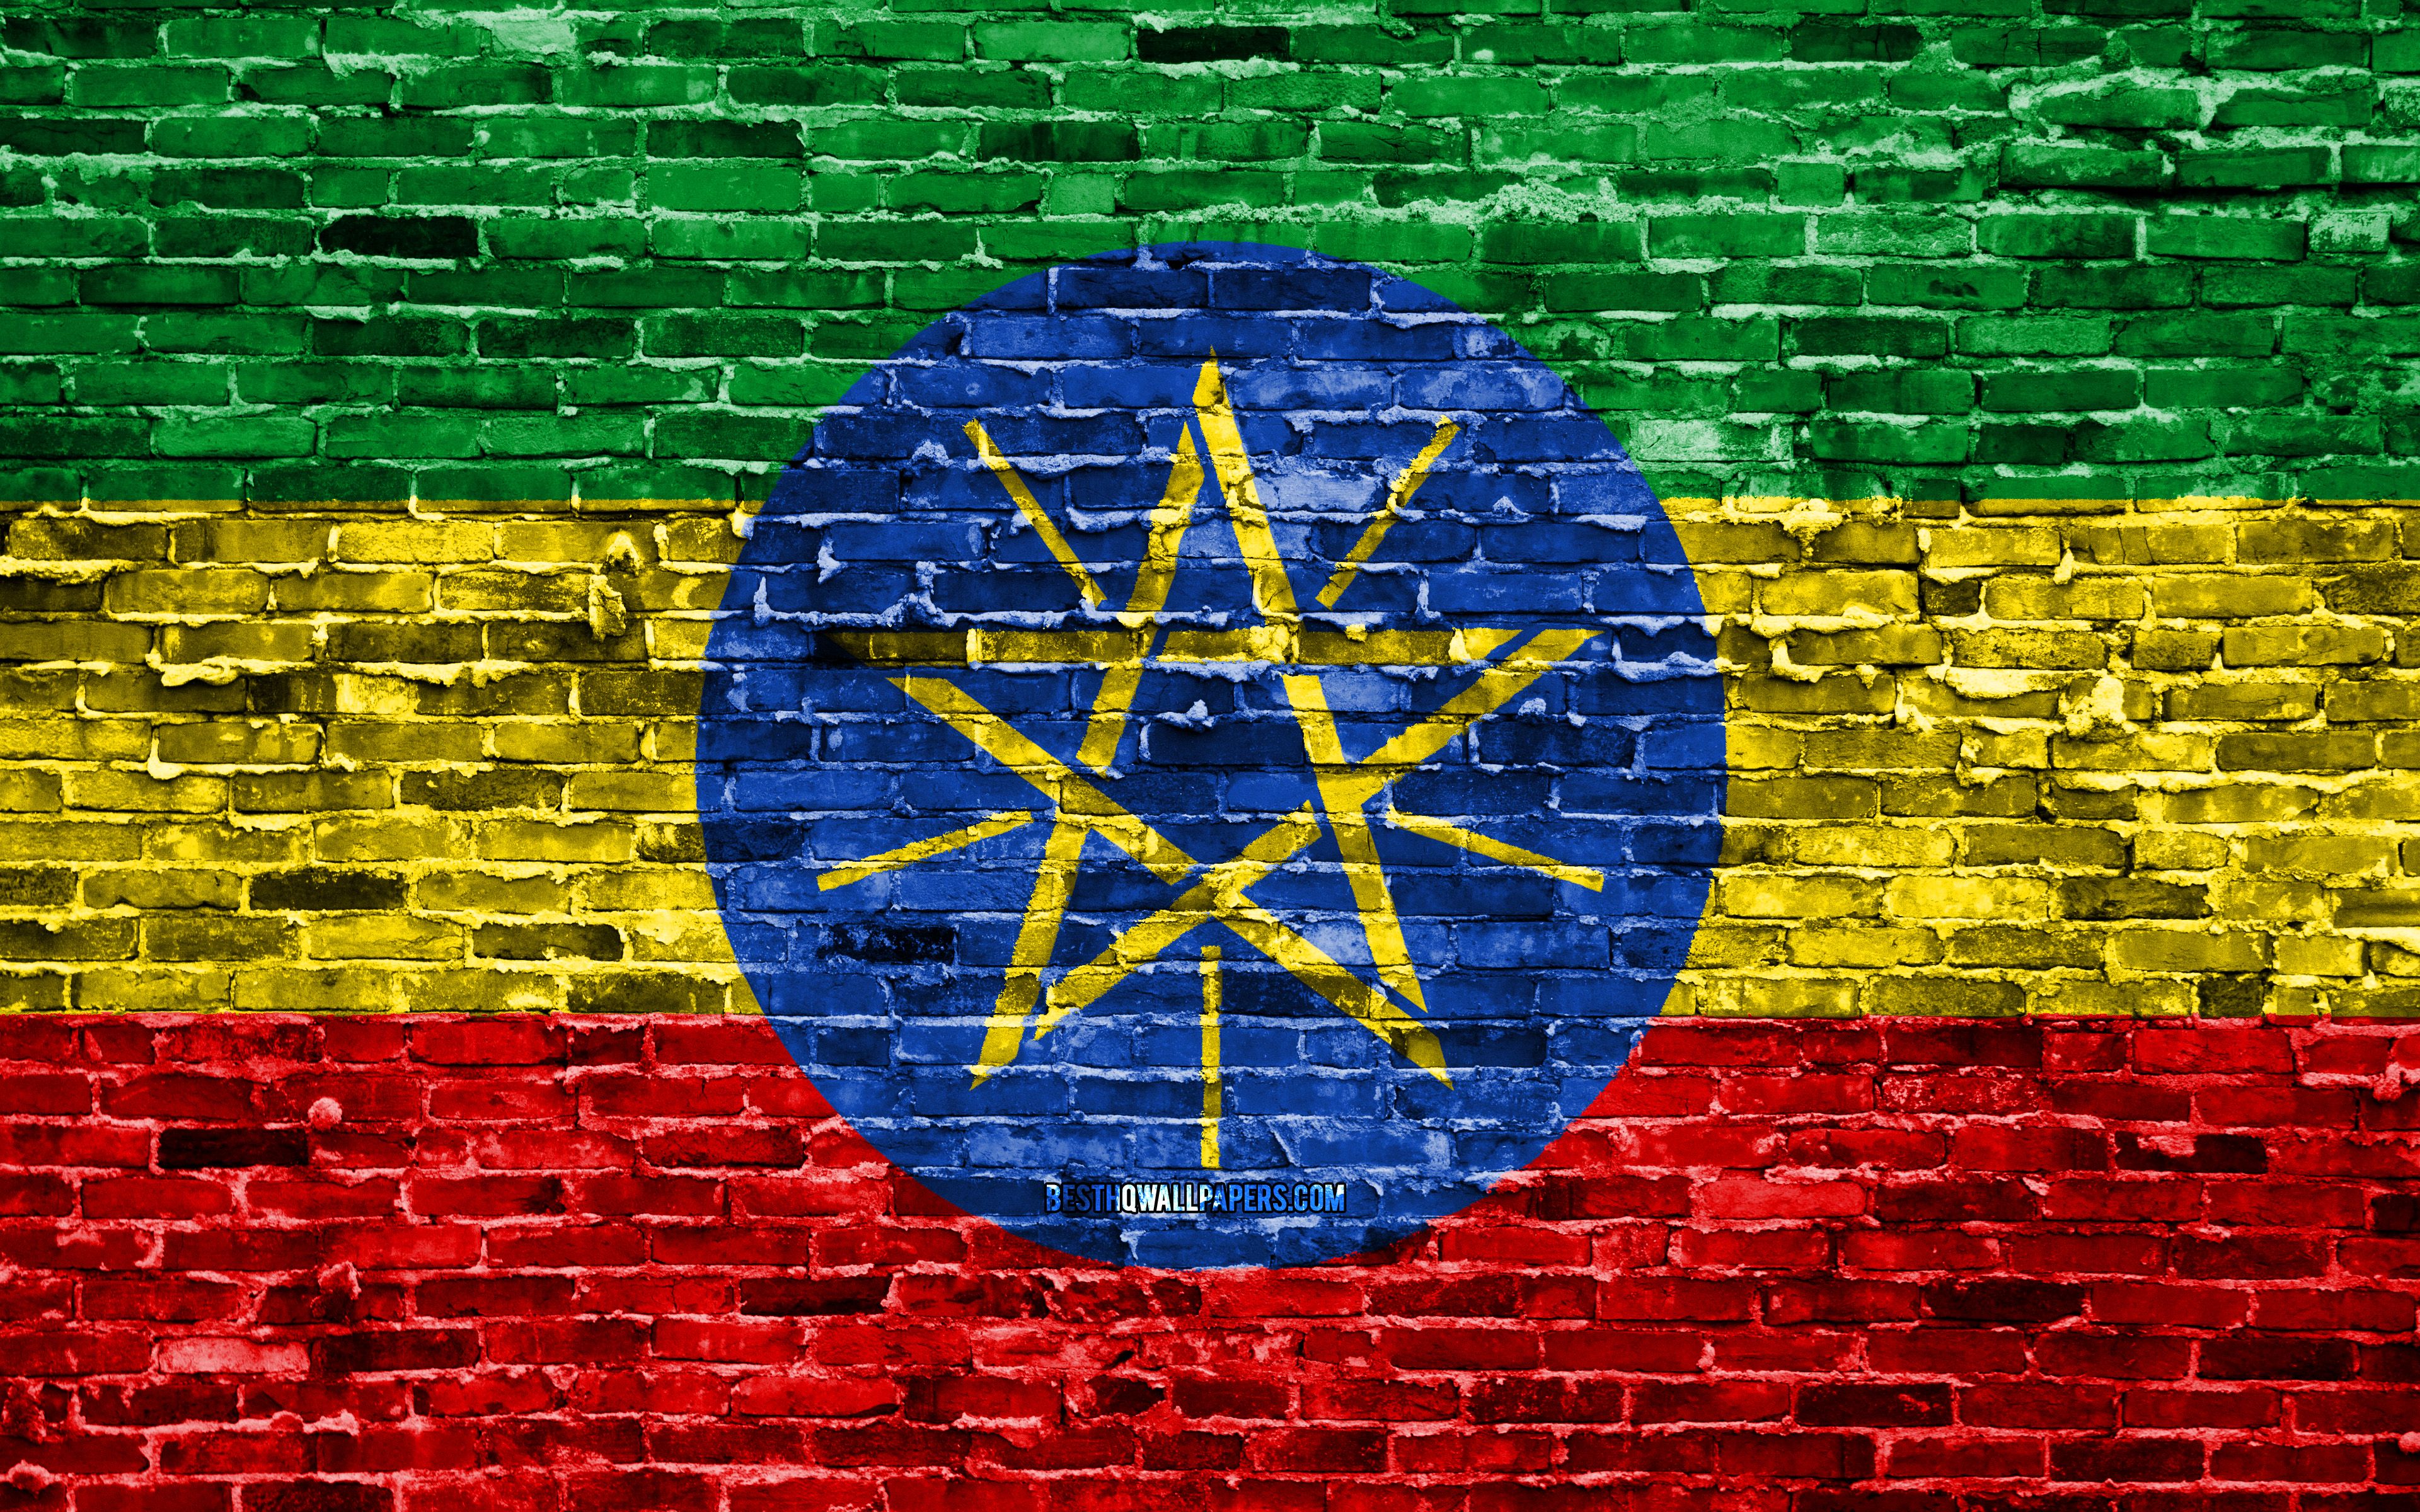 Download wallpaper 4k, Ethiopian flag, bricks texture, Africa, national symbols, Flag of Ethiopia, brickwall, Ethiopia 3D flag, African countries, Ethiopia for desktop with resolution 3840x2400. High Quality HD picture wallpaper